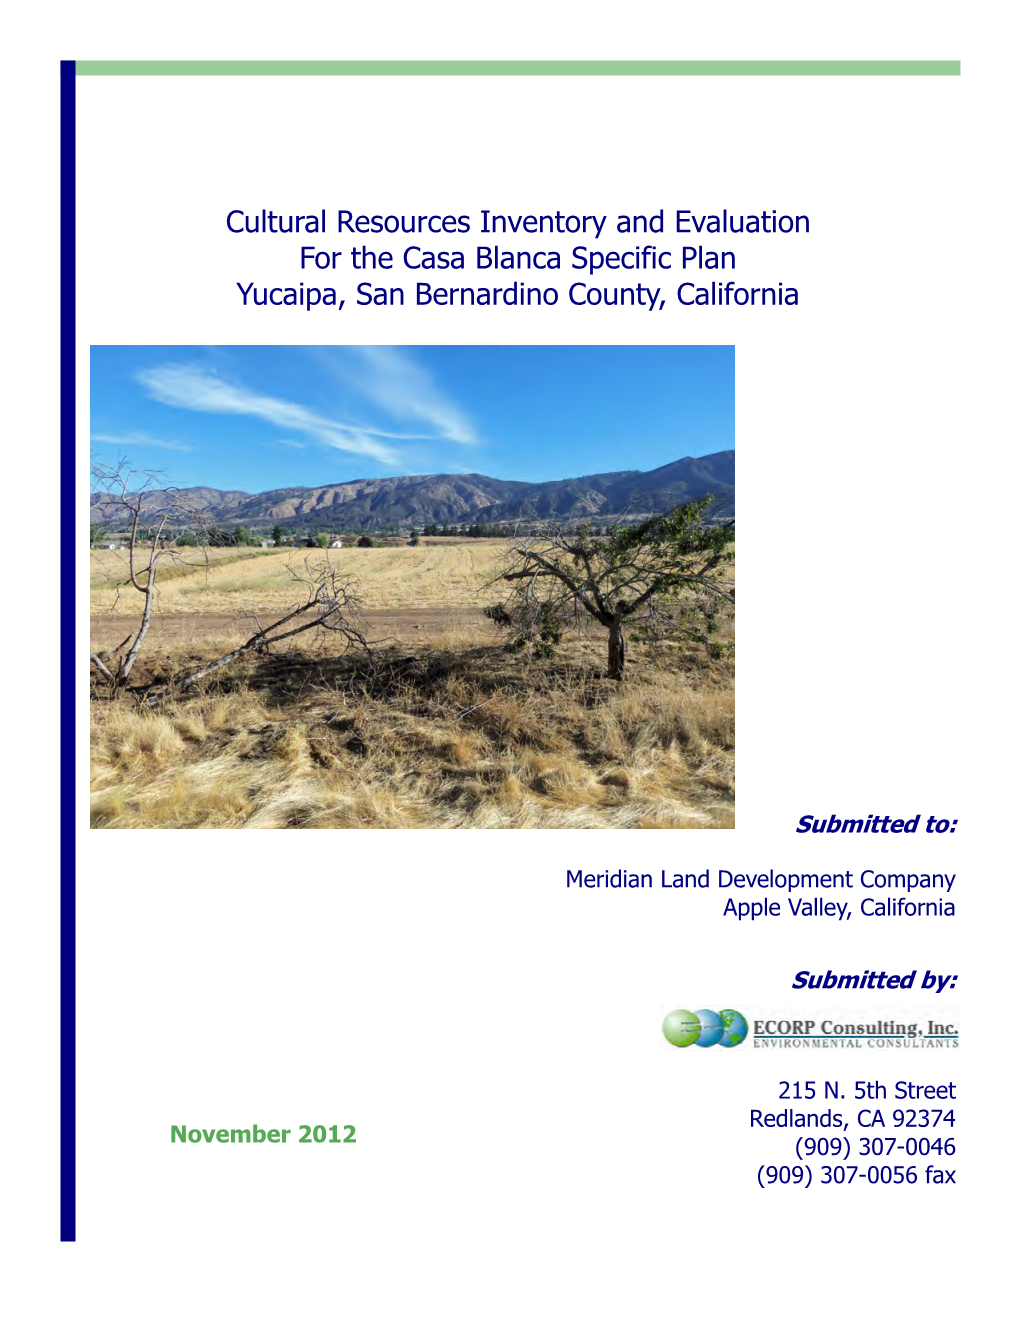 Cultural Resources Inventory and Evaluation for the Casa Blanca Specific Plan Yucaipa, San Bernardino County, California